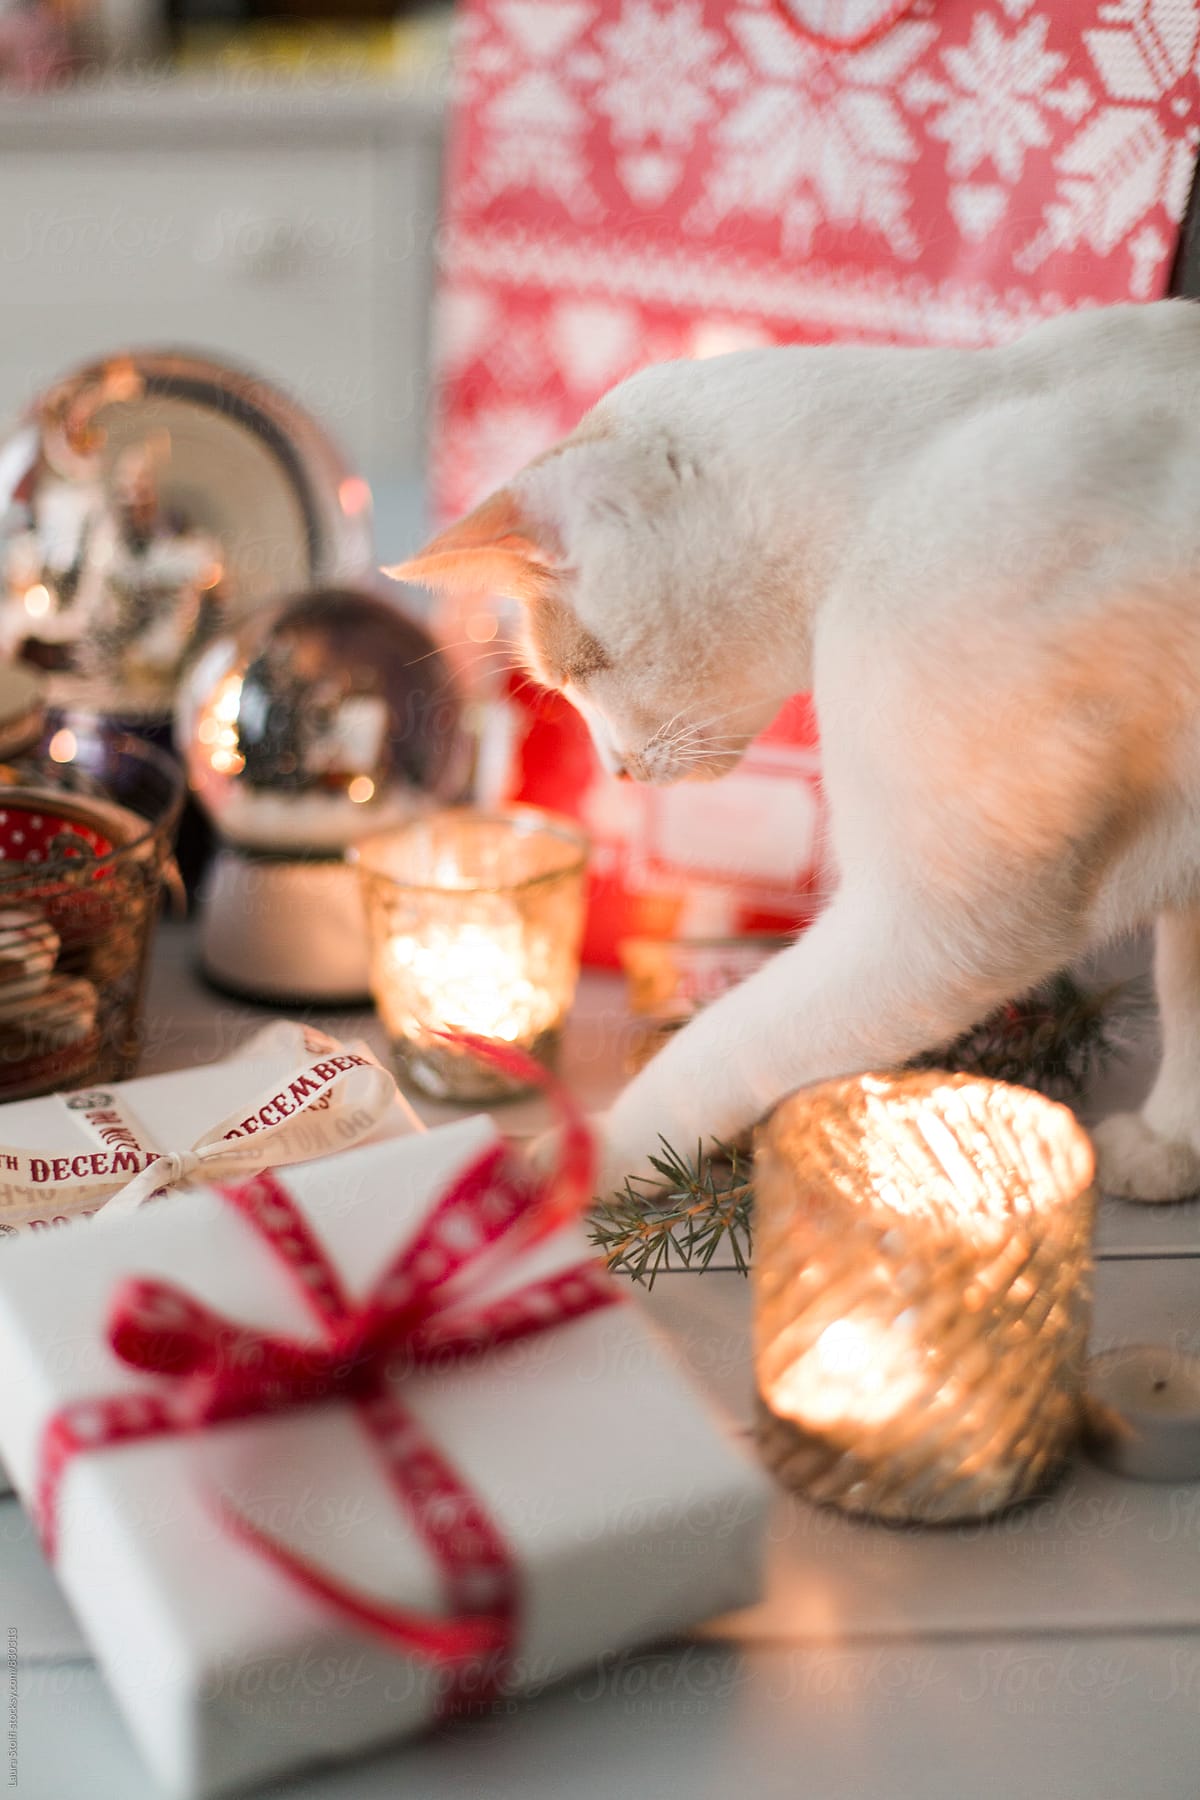 Curious cat exploring table with candles, snow globes and Christmas presents